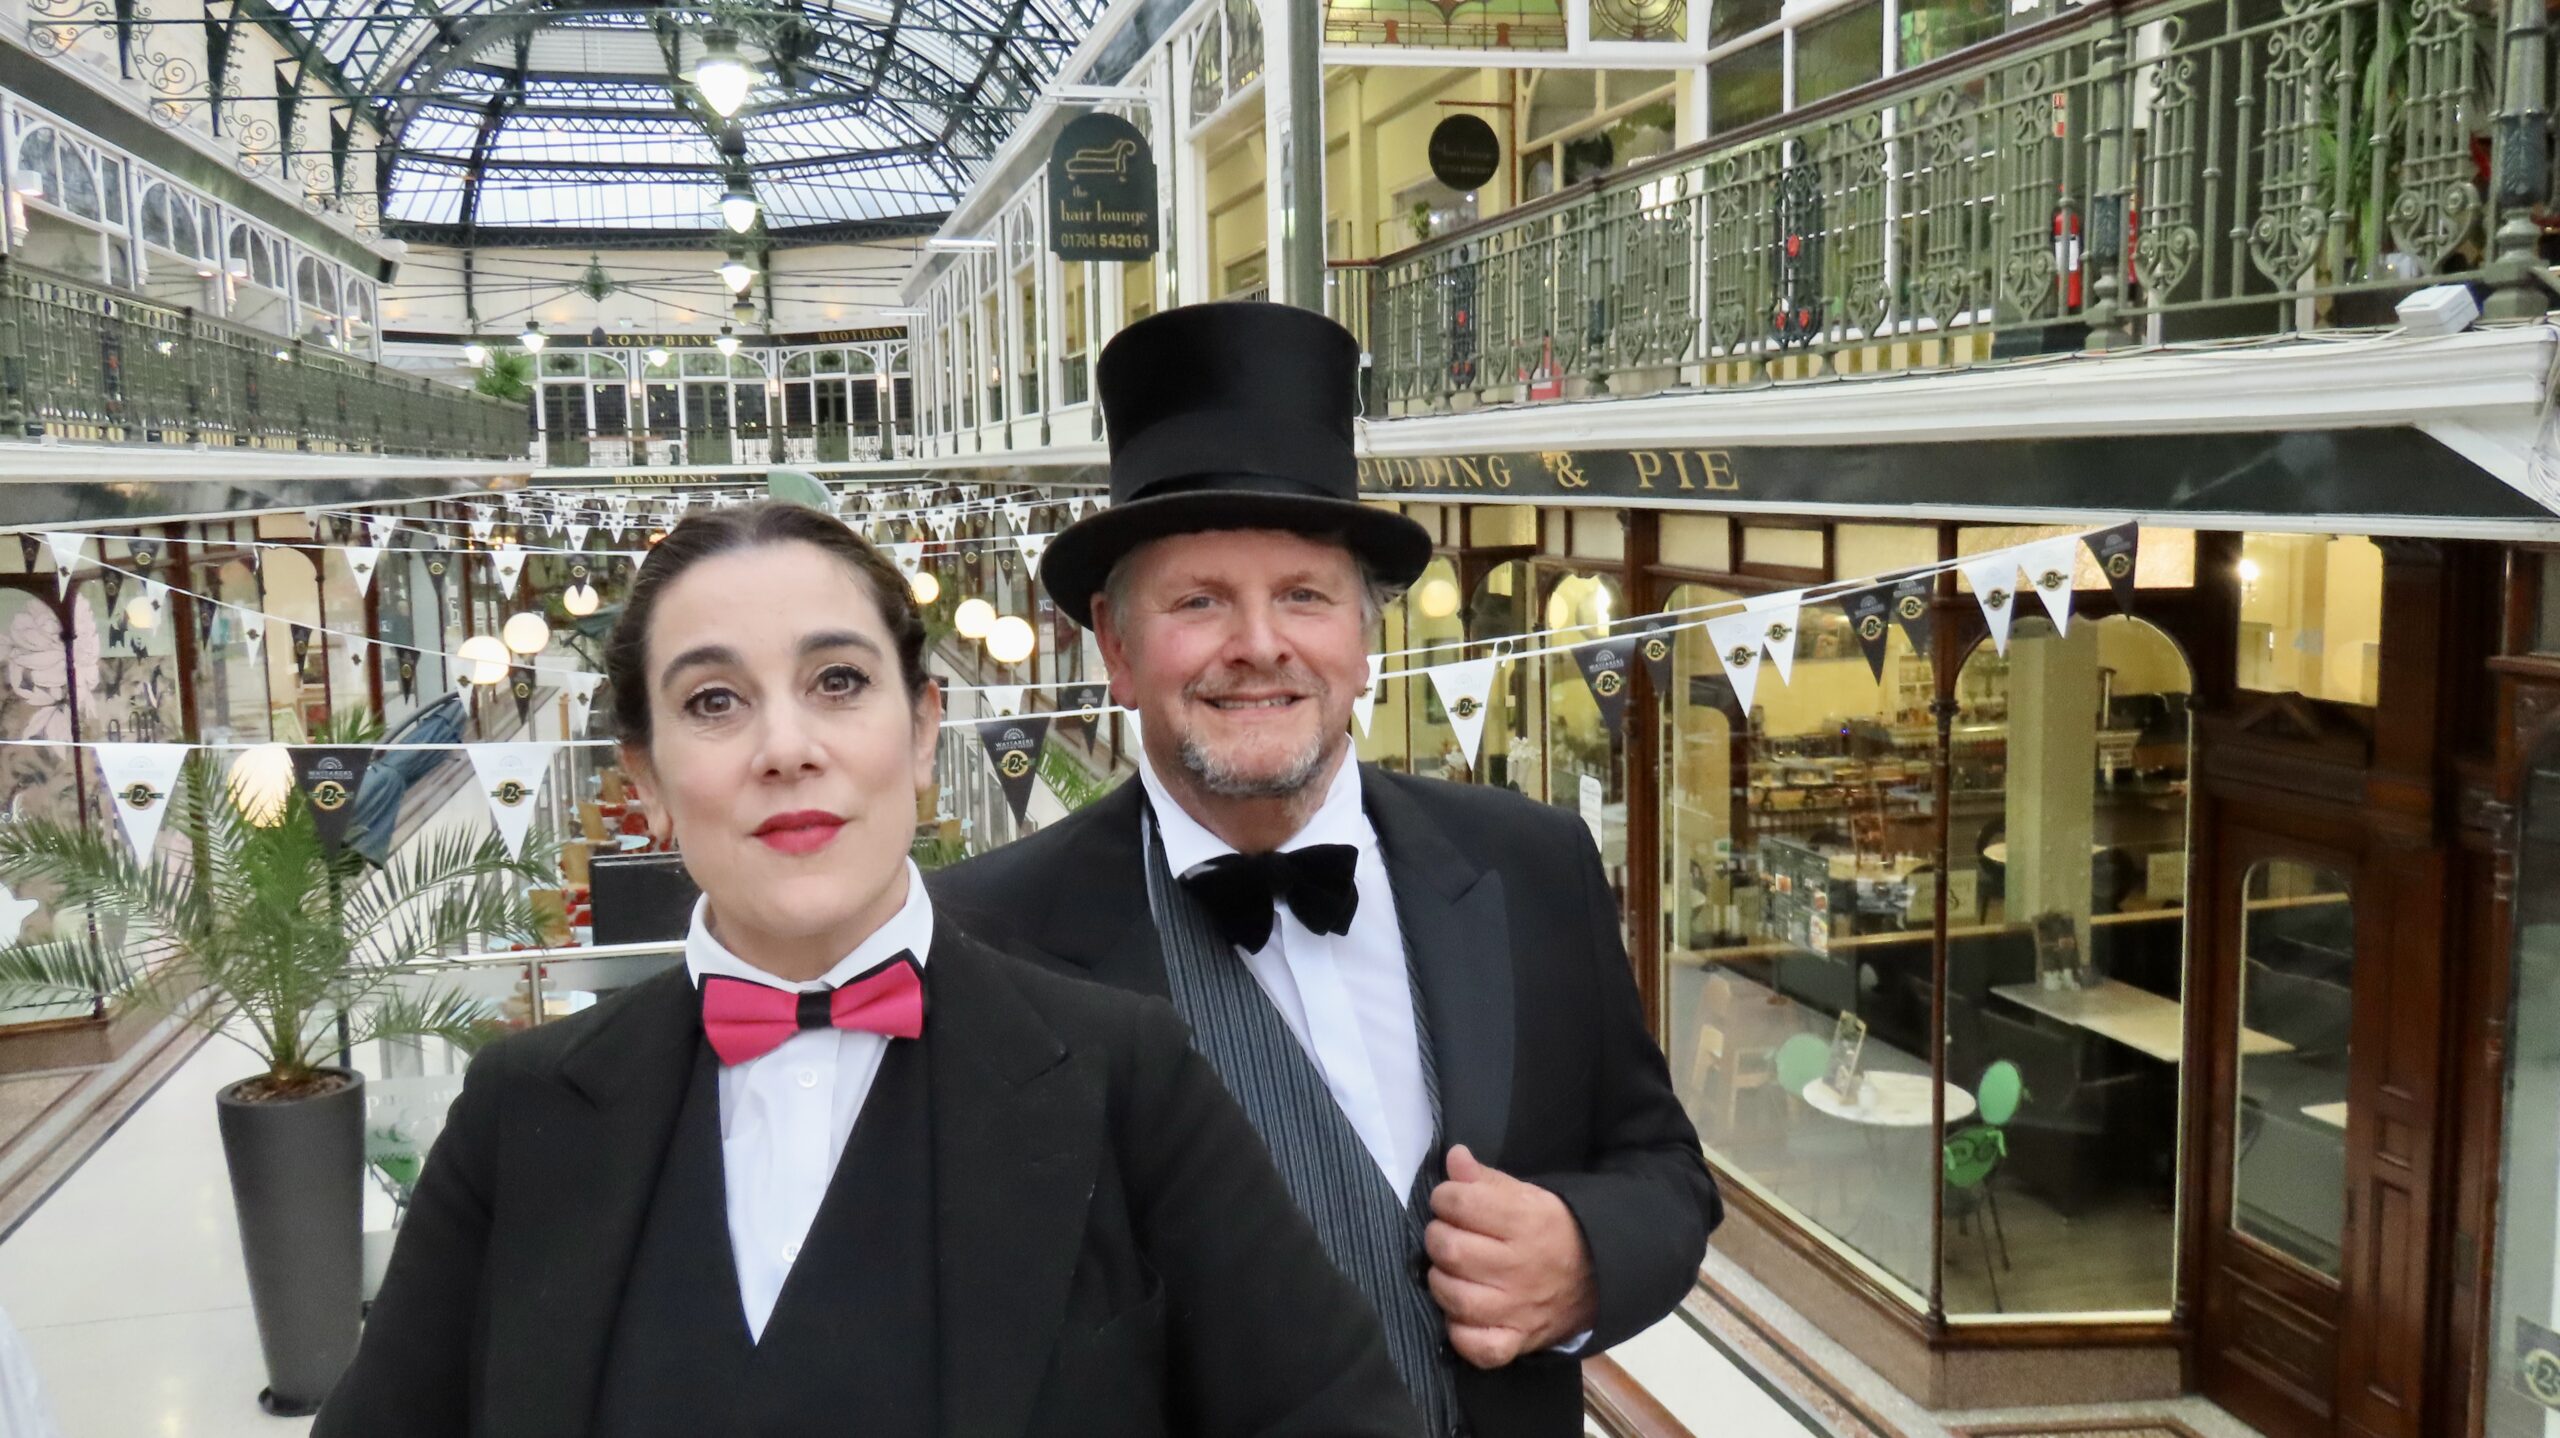 People are being invited to enjoy a very special Victorian Weekend as the historic Wayfarers Shopping Arcade in Southport celebrates its 125th anniversary.Vesta Tilley and Master of Ceremonies Jordan Plunkett. Photo by Andrew Brown Stand Up For Southport